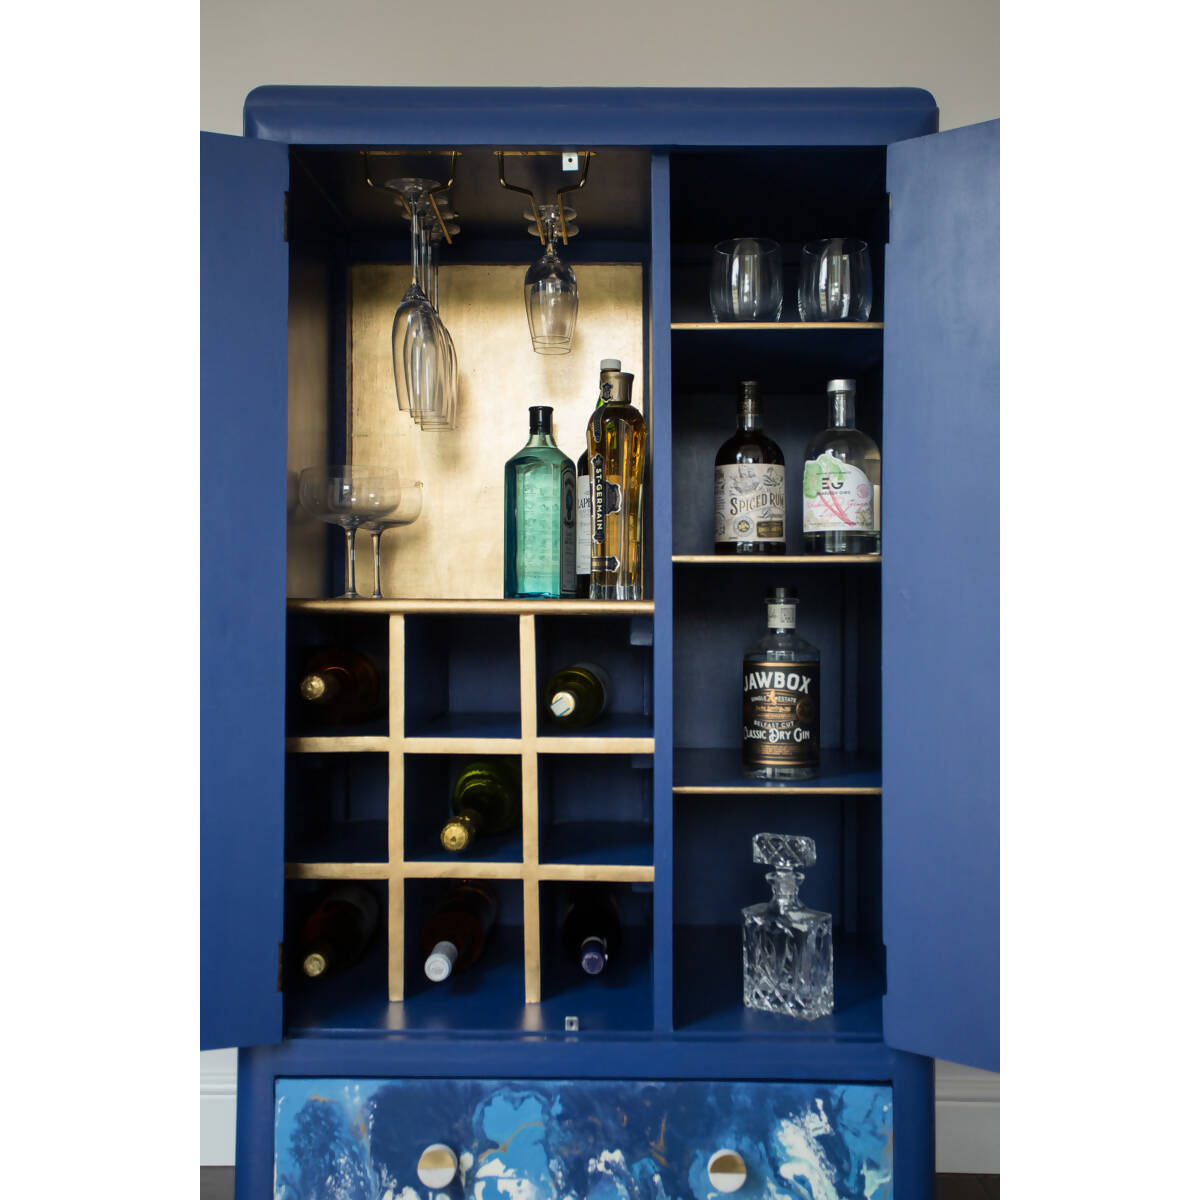 Marbled 'Bardrobe' - Wardrobe Converted Into Drinks Cabinet